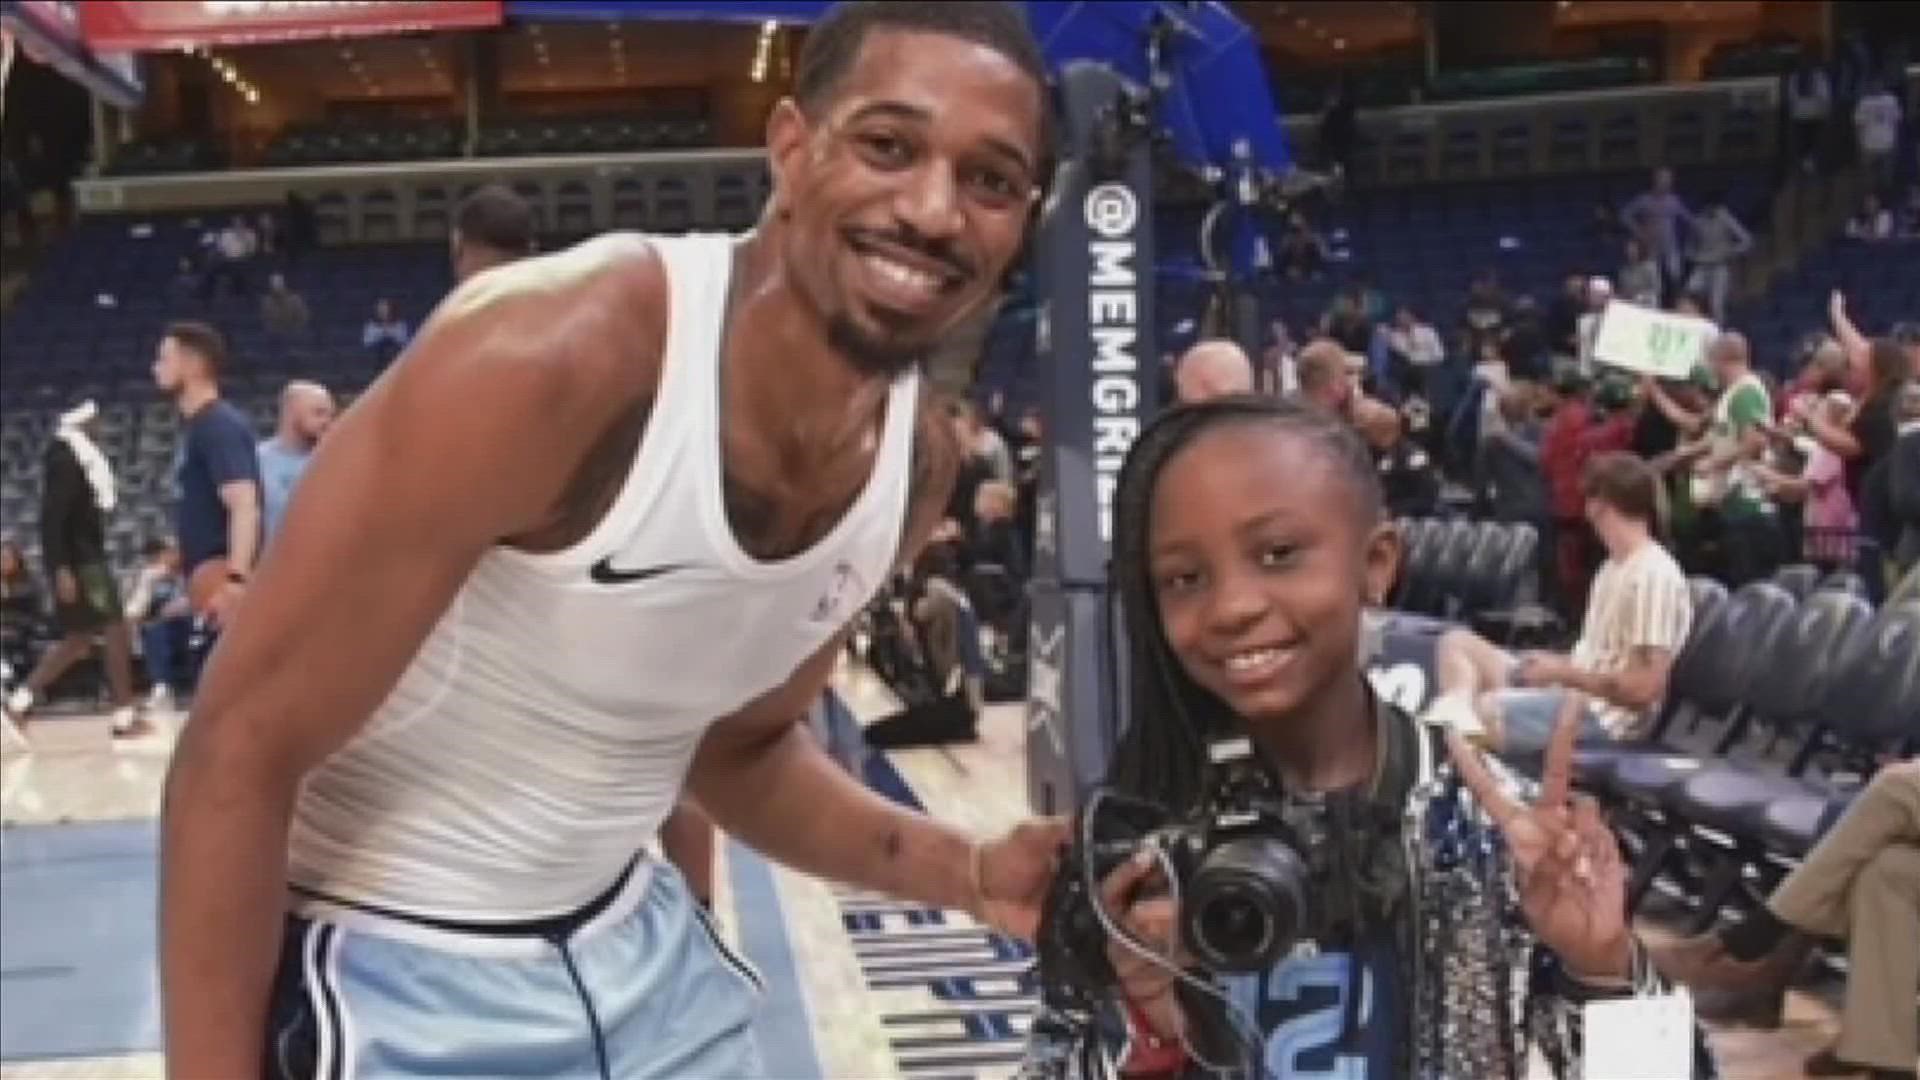 Storee Walton has been recognized as a professional photographer since she was just 4 years old, the Memphis Grizzlies gave her the opportunity to shoot game photos.